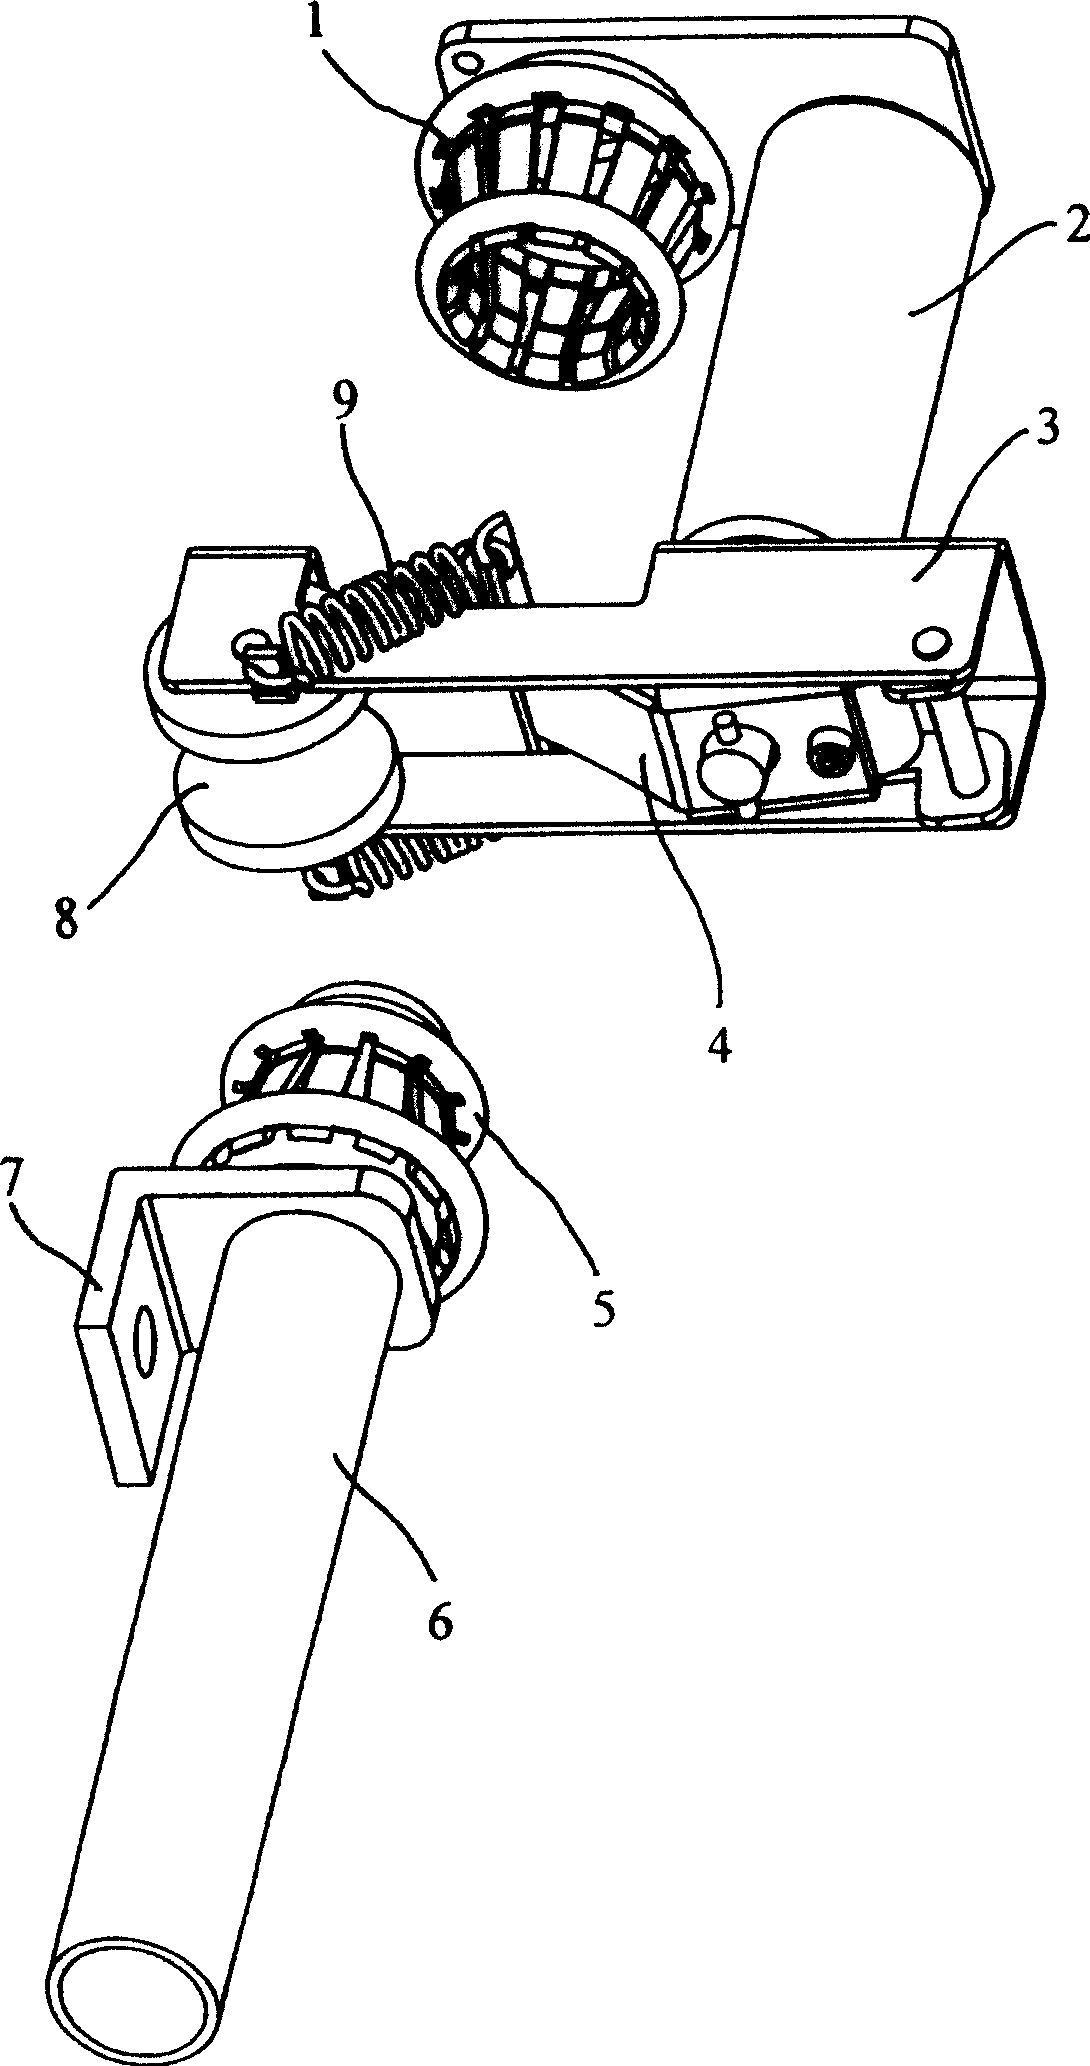 Switch device of parallel connection vacuum arc extinguishing chamber